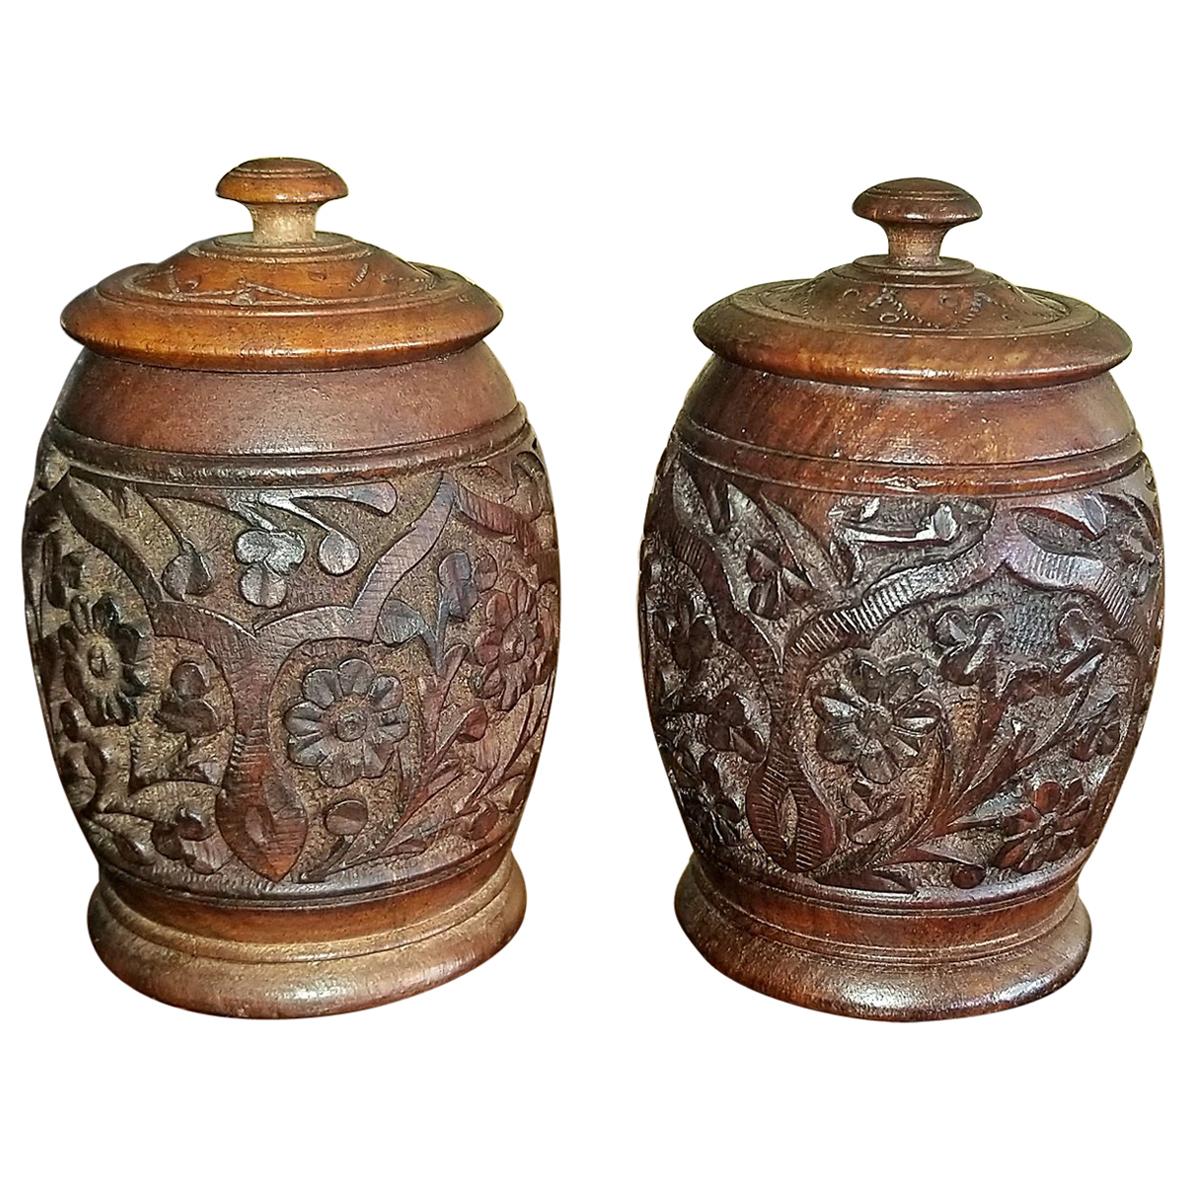 19th Century Anglo-Indian Pair of Carved Wooden Spice Urns